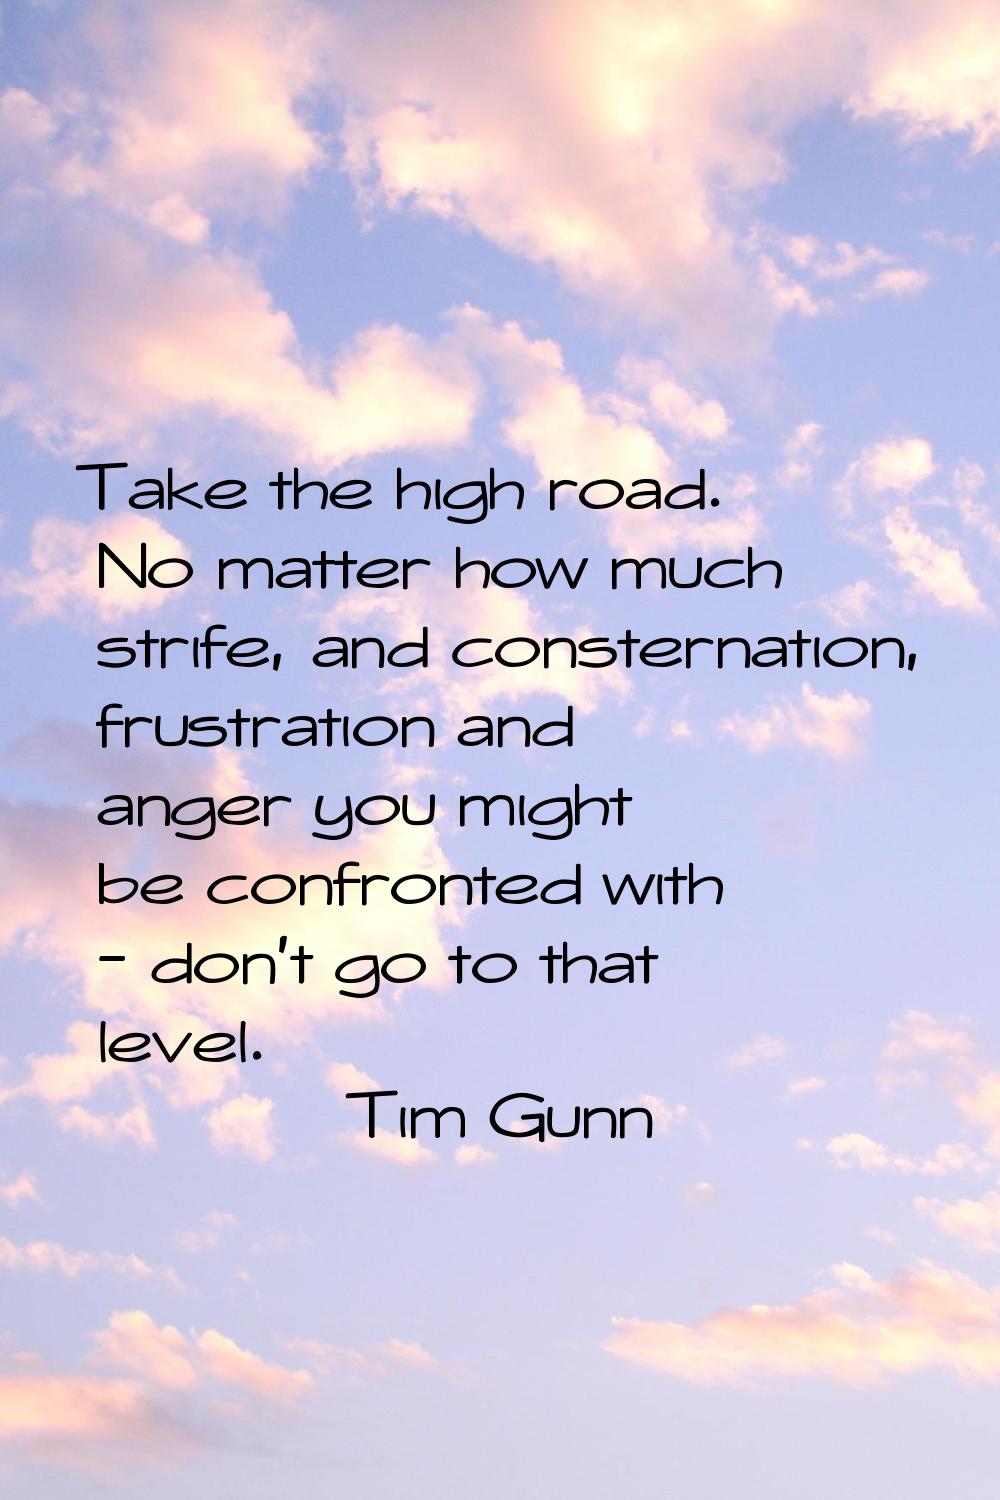 Take the high road. No matter how much strife, and consternation, frustration and anger you might b